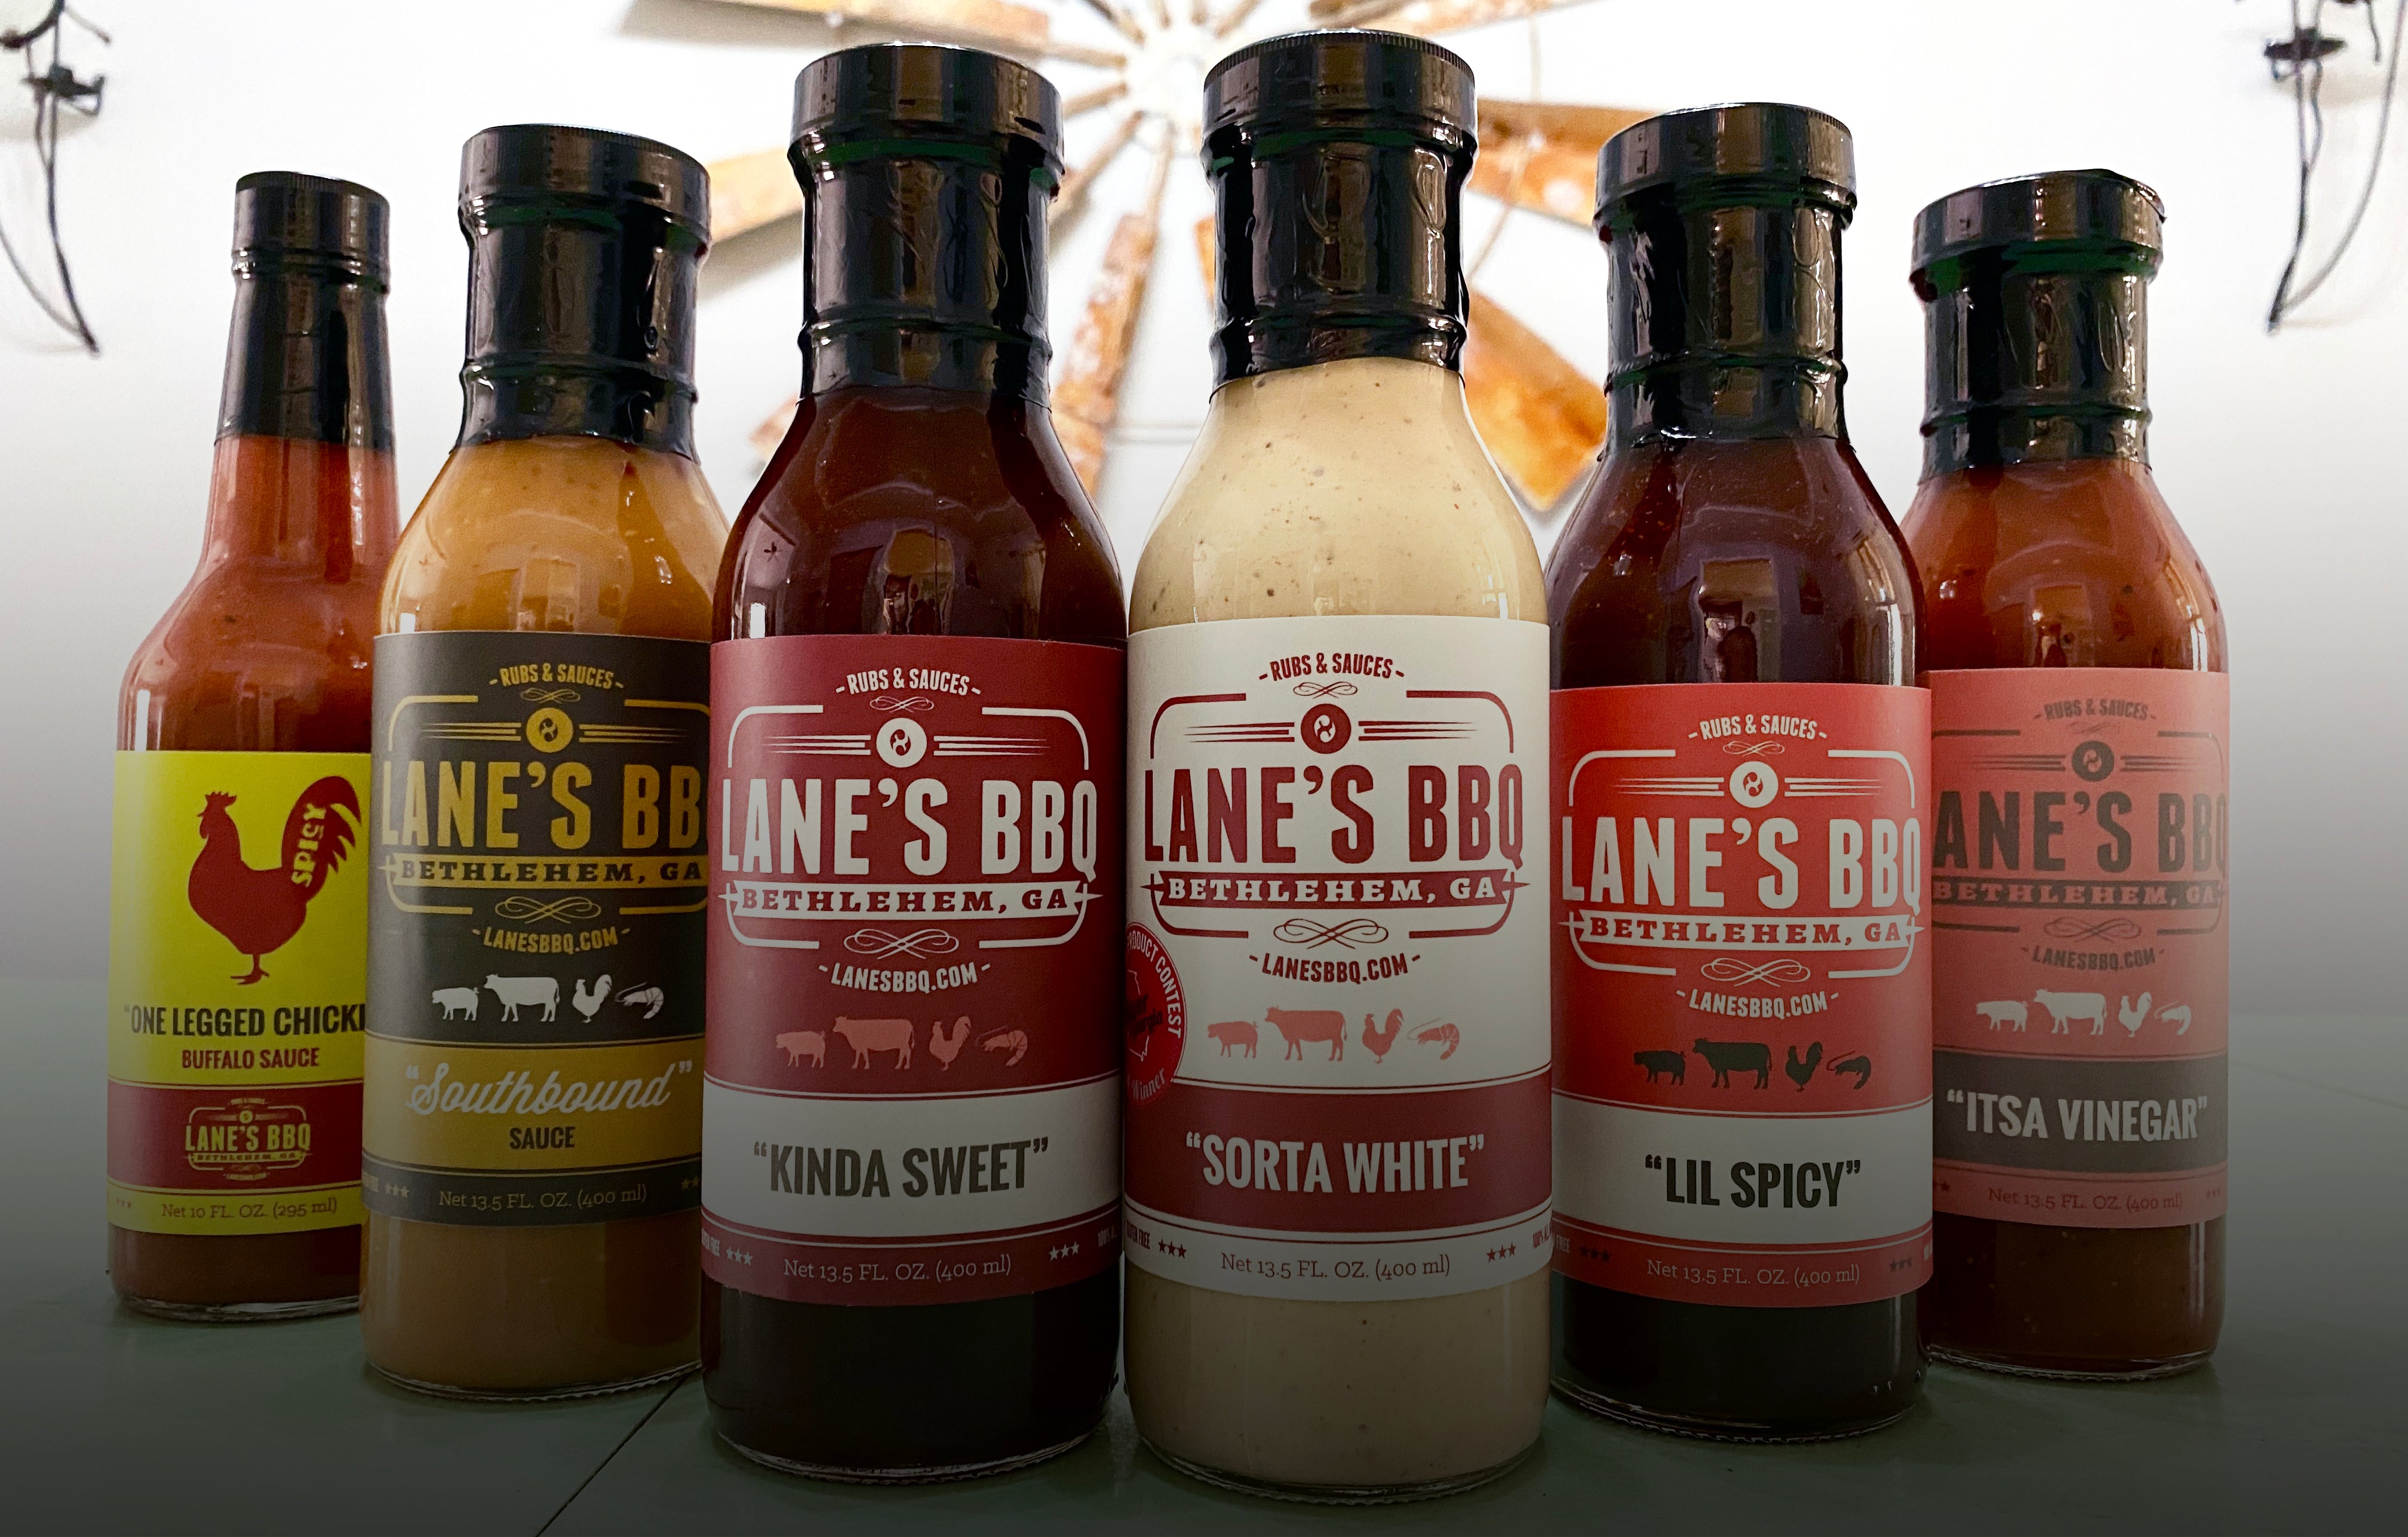 All Lane's BBQ Sauces in a row